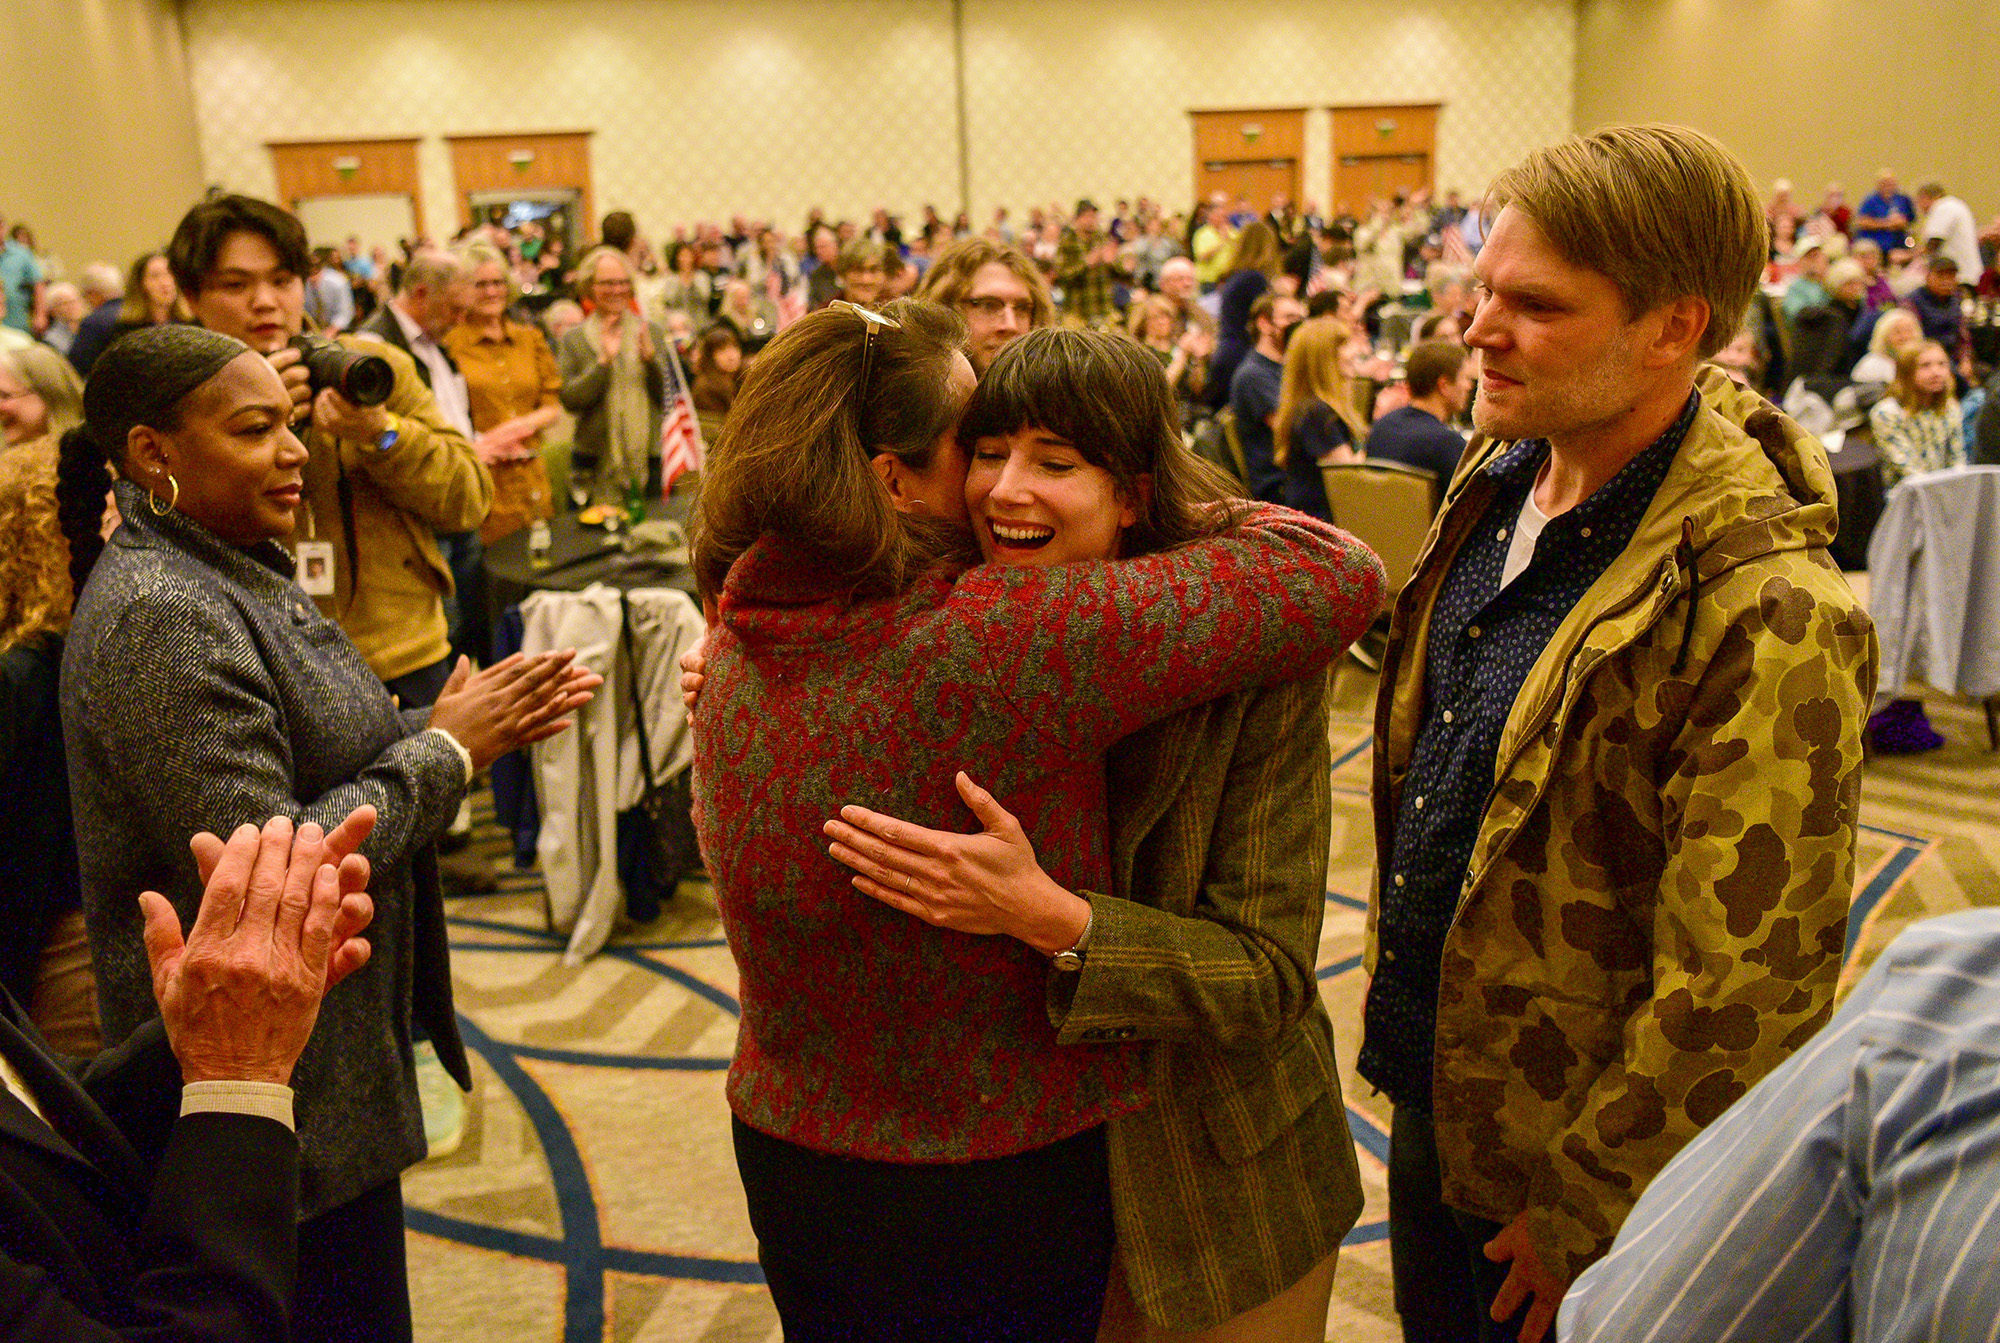 Democratic nominee for Washington’s Third District Marie Gluesenkamp Perez, center, hugs supporters after her speech Tuesday, Nov. 8, 2022, at the Clark County Democrats election night watch party at the Downtown Vancouver Hilton.